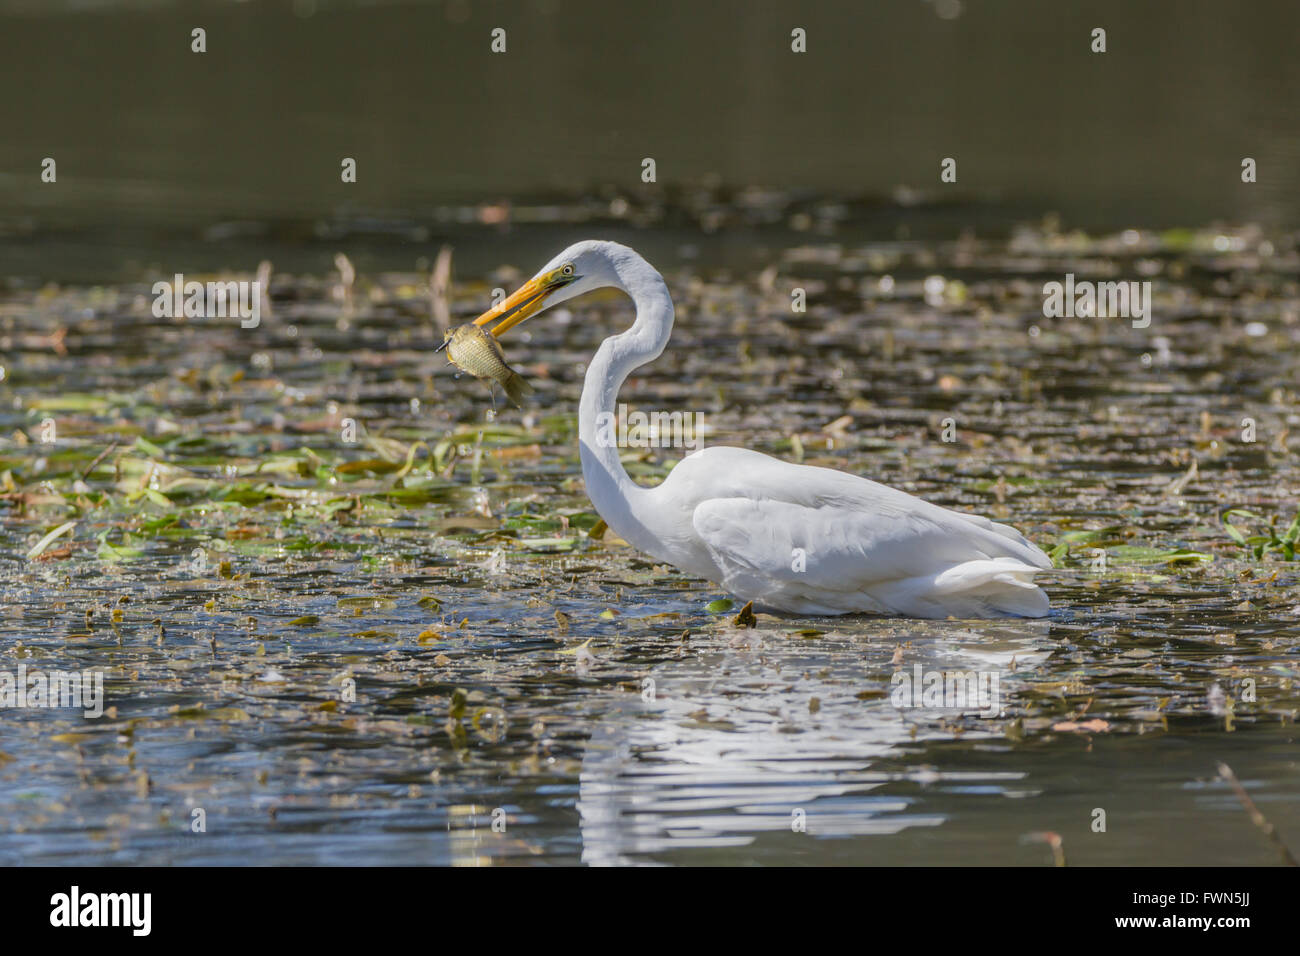 Great white egret in Mudgee at Lawson Park catching a carp. Stock Photo